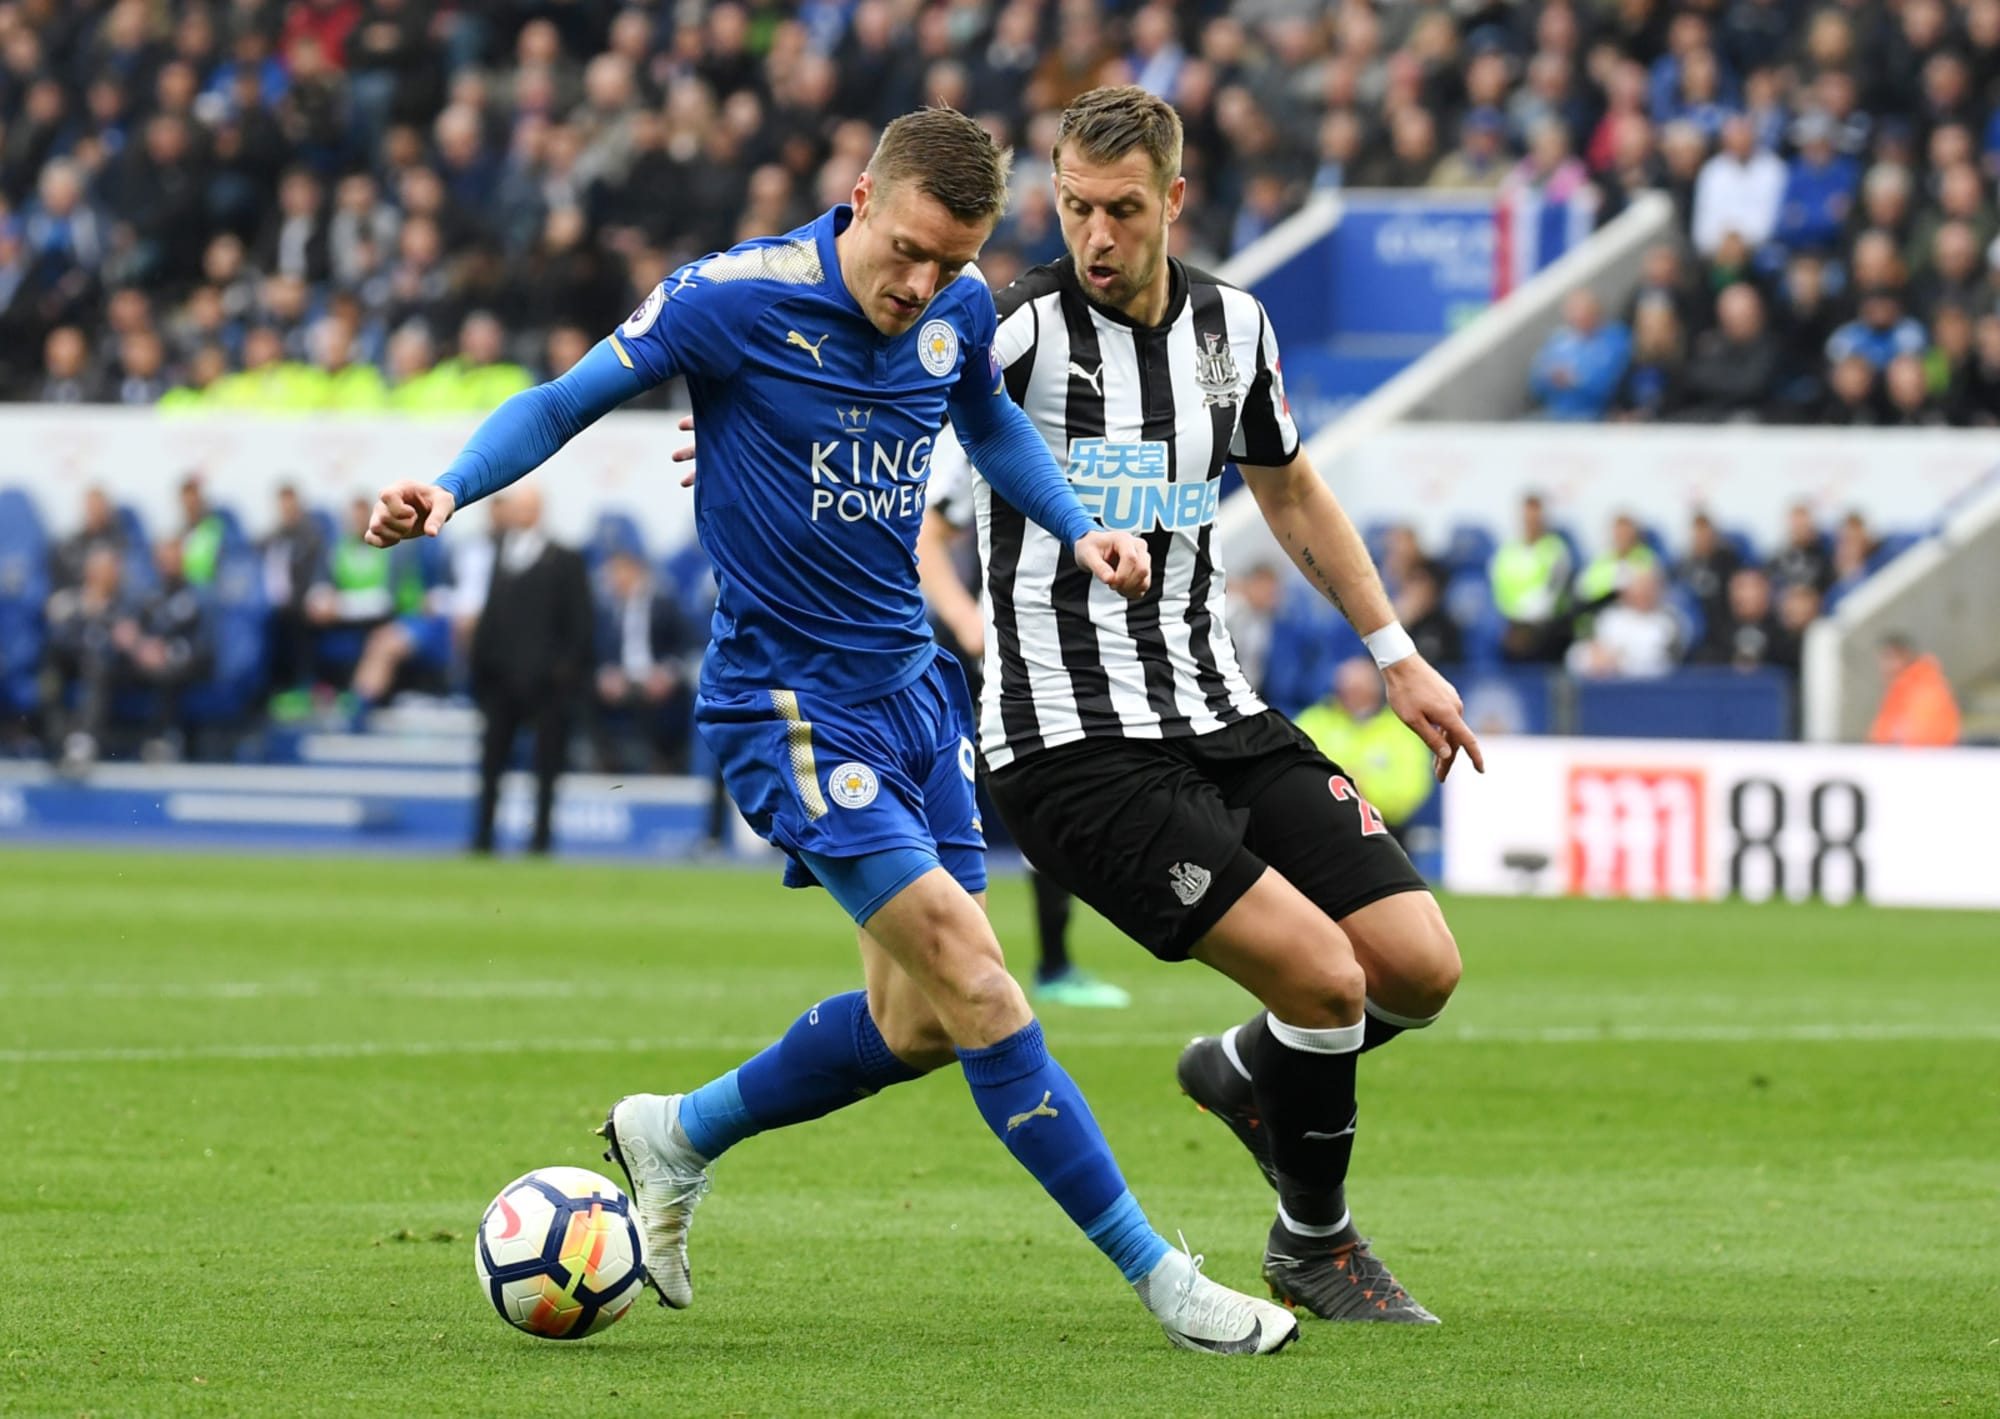 Newcastle United: 5 things we learned from the 2-1 win vs. Leicester City